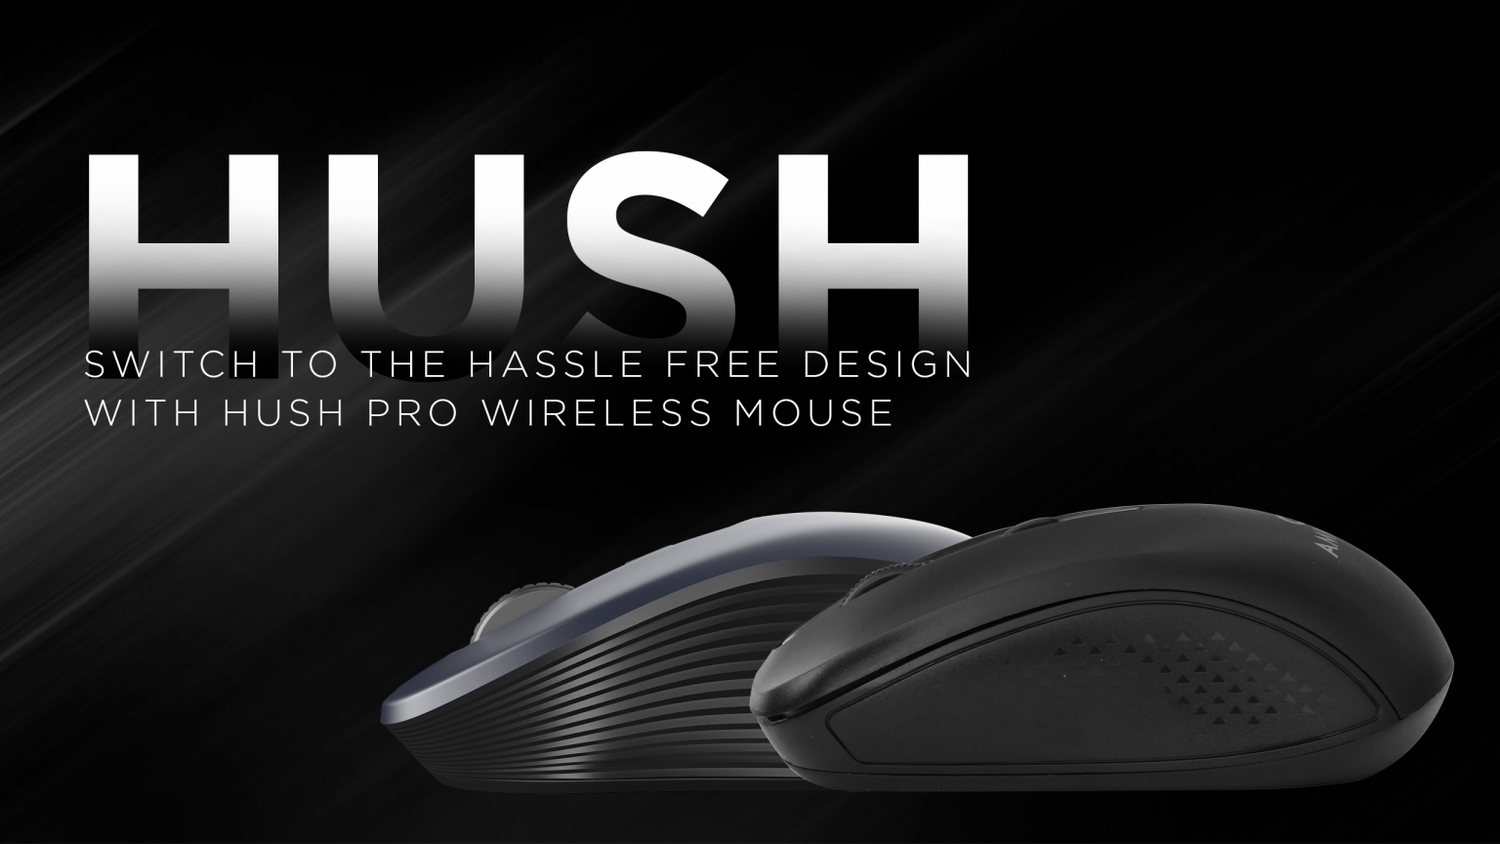 Stay Ahead In This World Of Wireless Tech With The Hush Pro Wireless Mouse